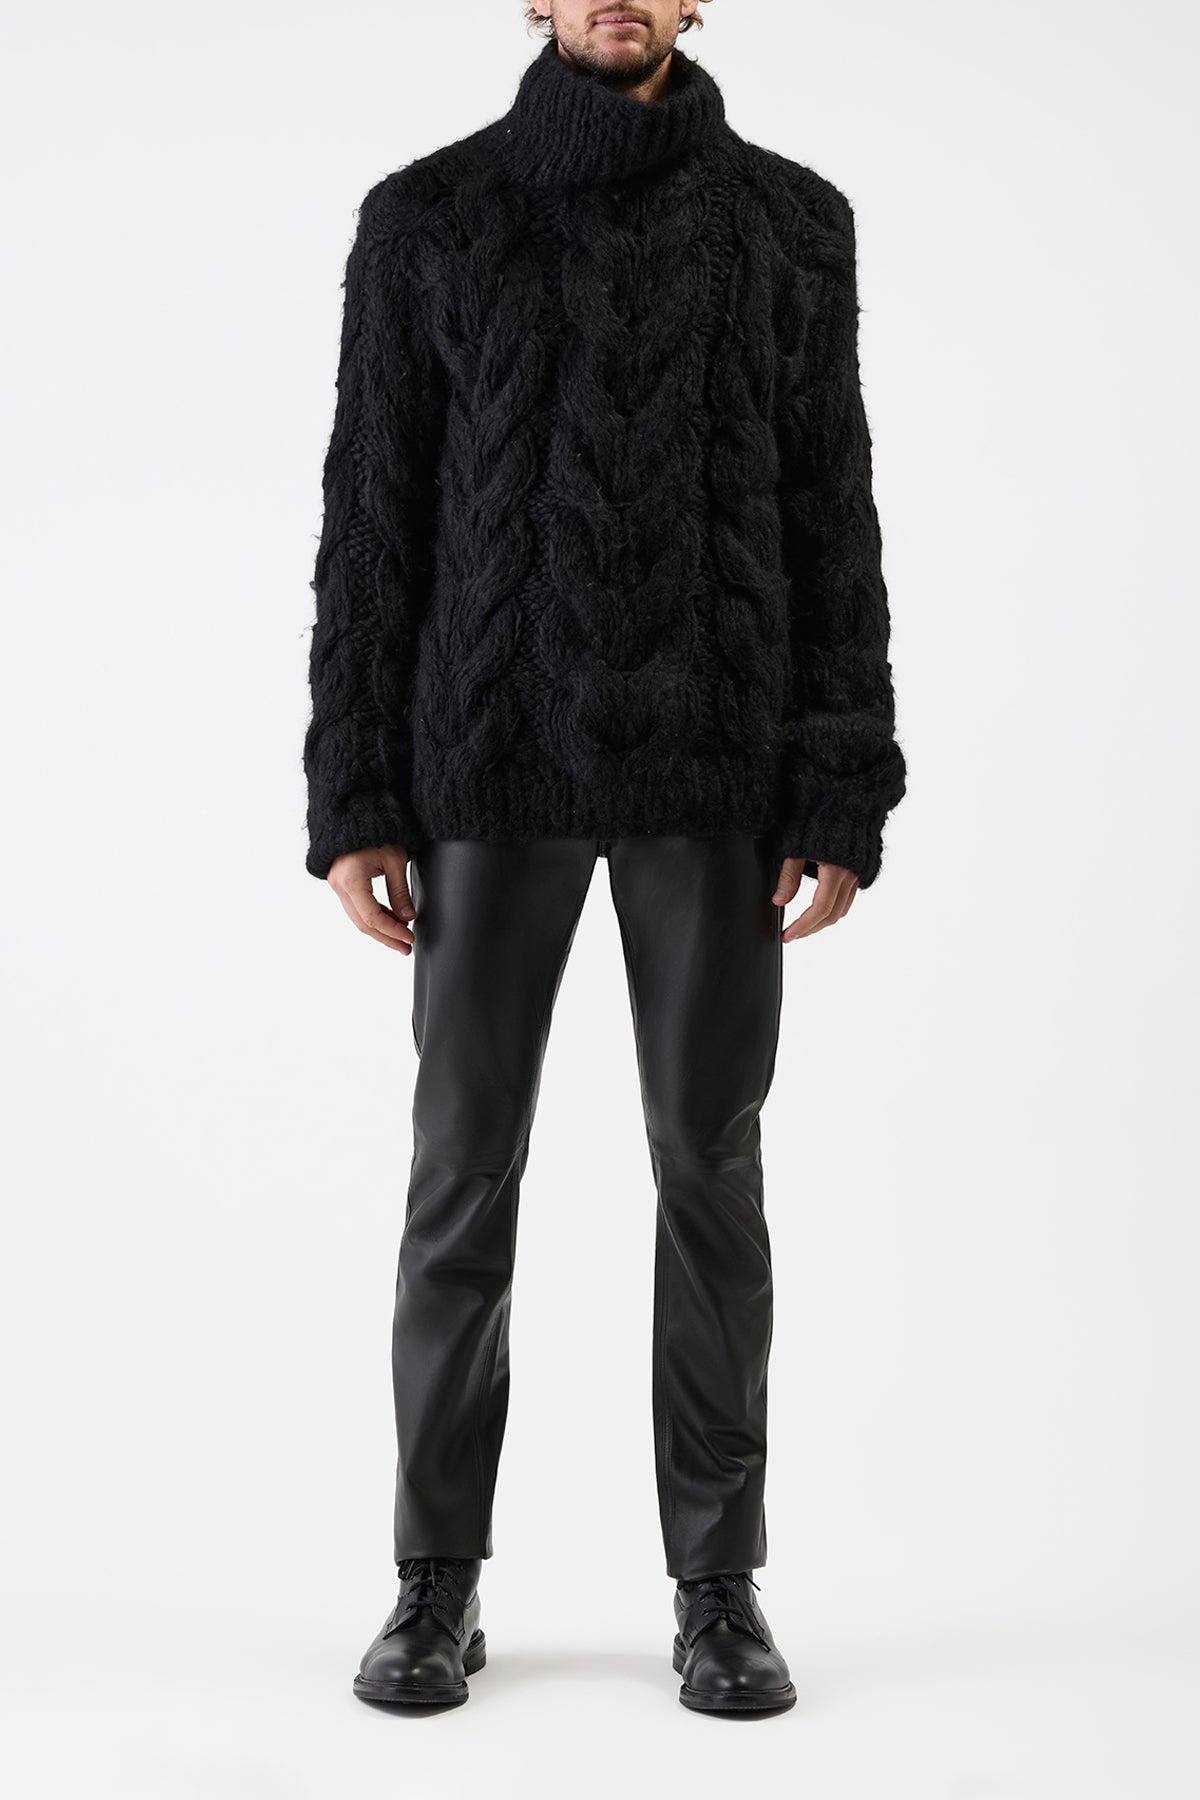 Ray Knit Sweater in Black Welfat Cashmere - 3